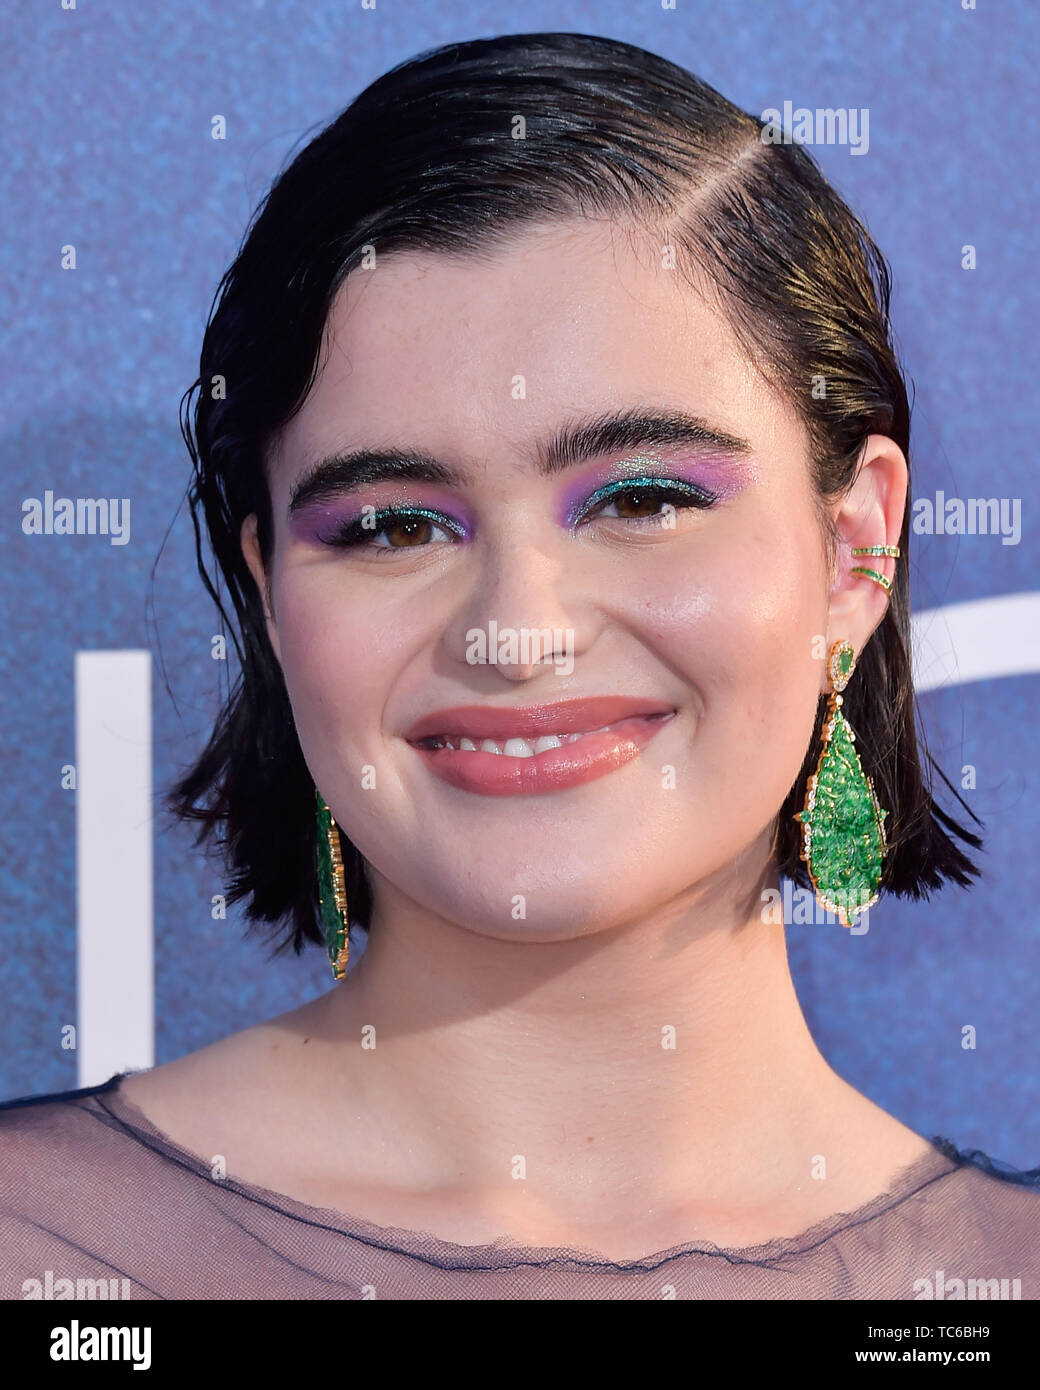 Hollywood, United States. 04th June, 2019. HOLLYWOOD, LOS ANGELES,  CALIFORNIA, USA - JUNE 04: Actress Barbie Ferreira wearing a Louiza  Babouryan dress, Gucci shoes, Narcisa Pheres earrings, a Borgioni ear cuff,  and